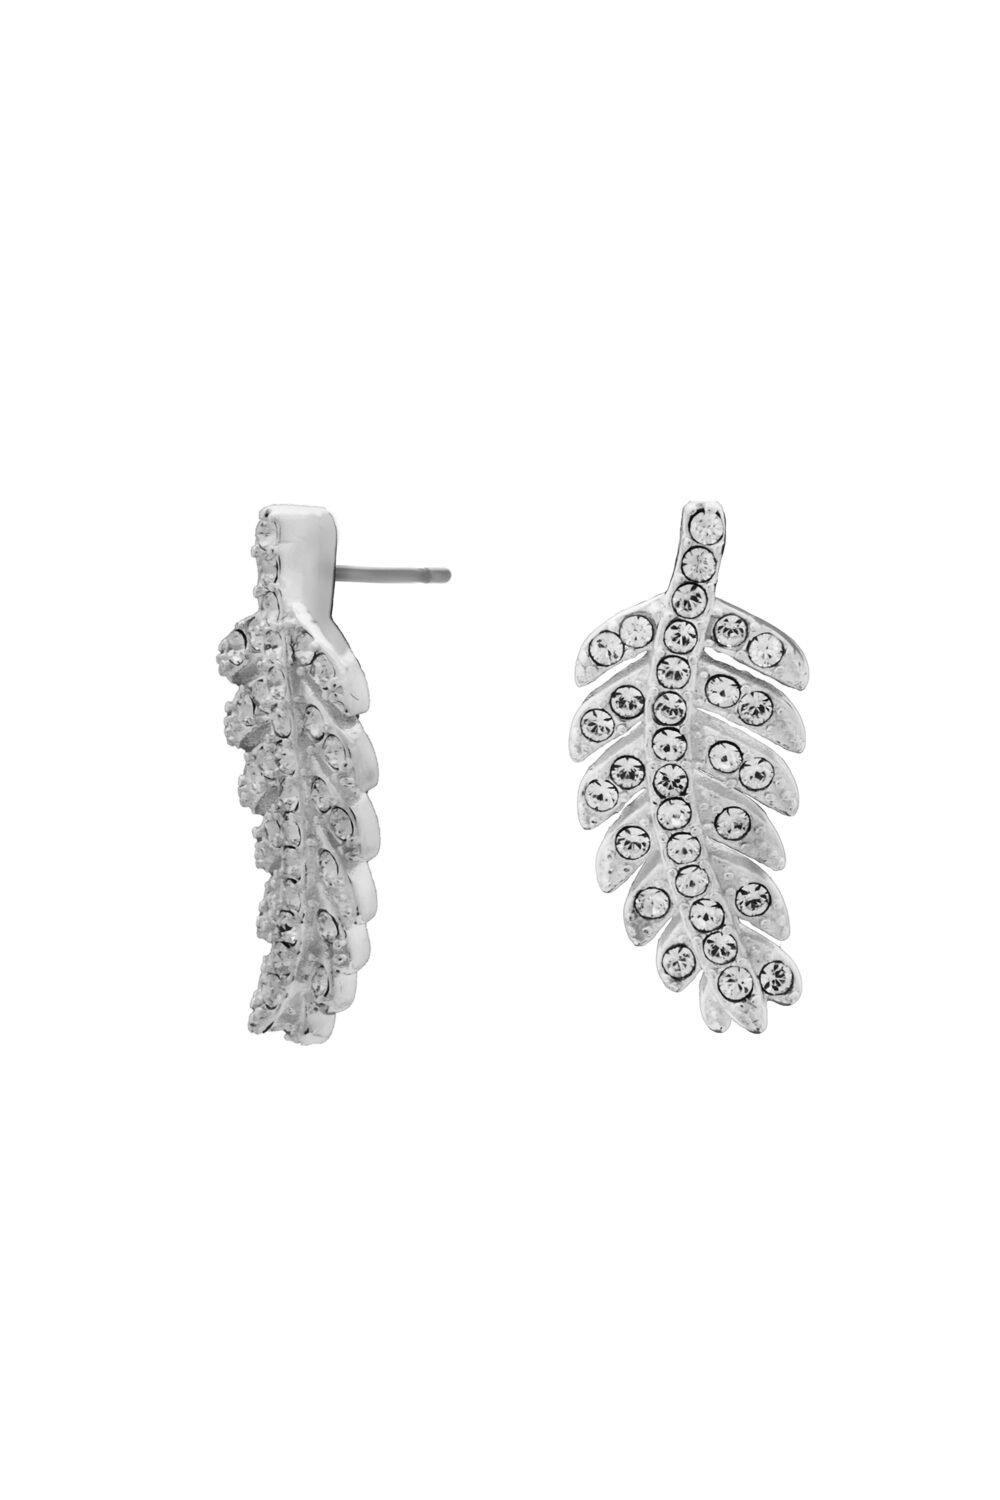 Jewellery Sterling Silver 925 Embellished with Crystals Feather Stud  Earrings Simply Silver